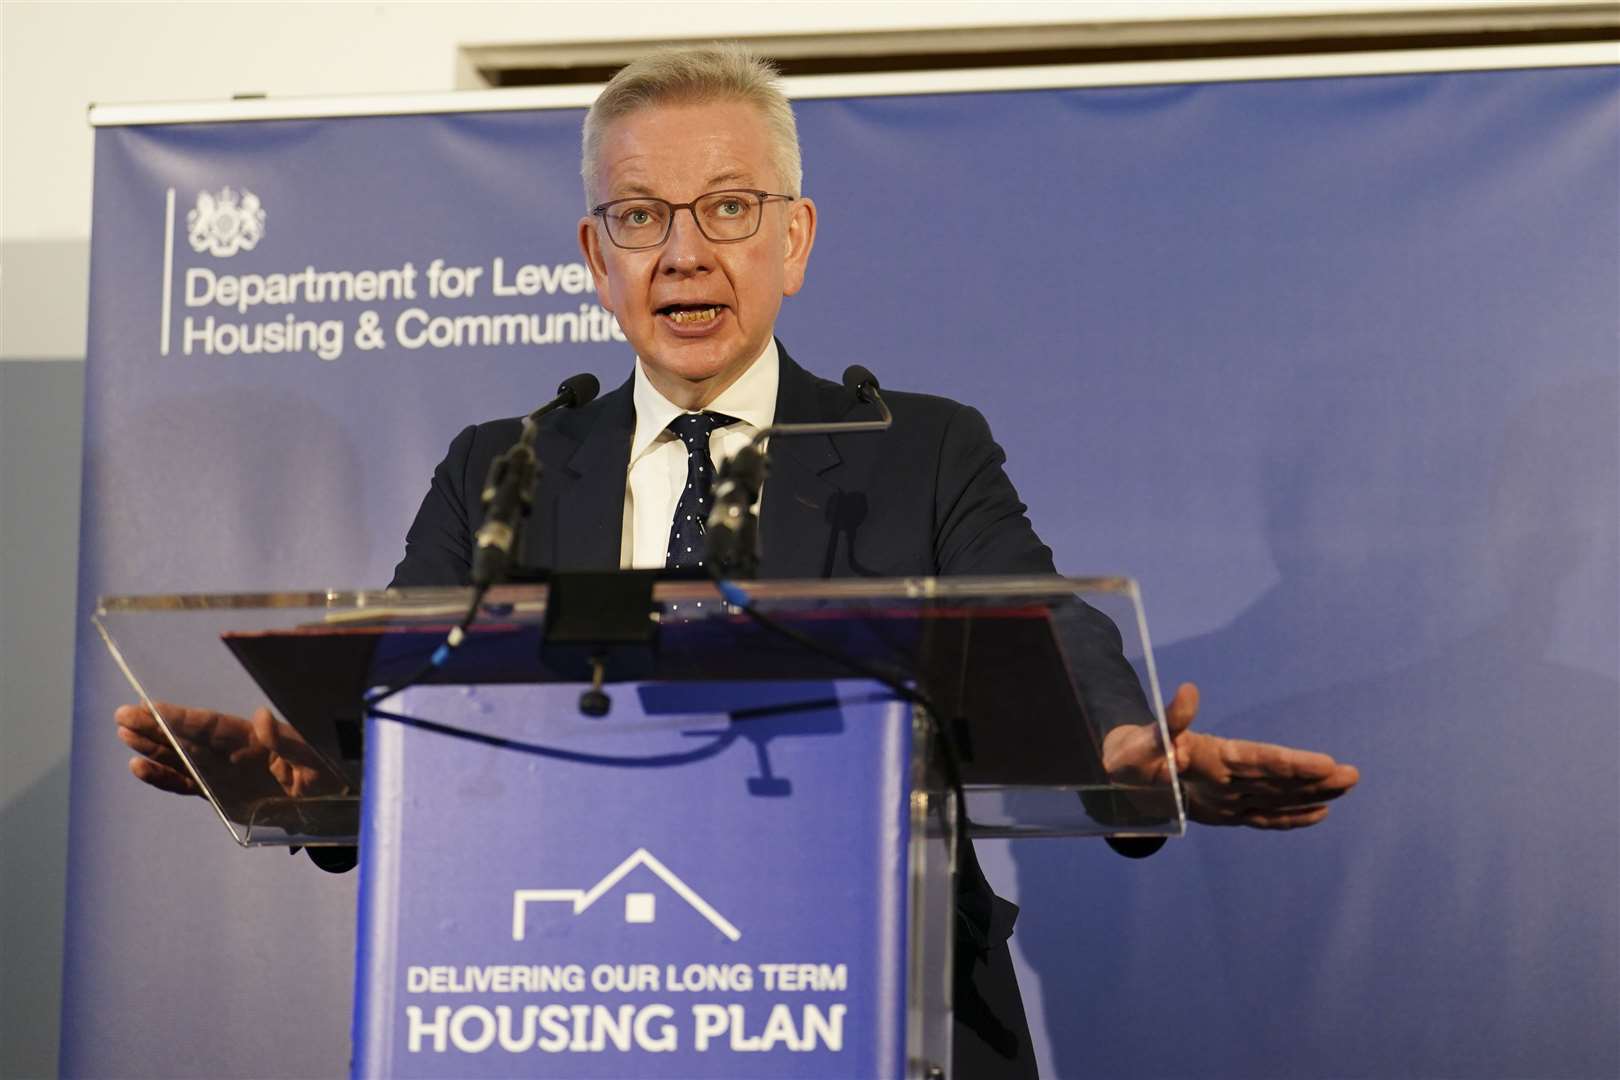 The letter was also addressed to Levelling Up Secretary Michael Gove (Jordan Pettitt/PA)